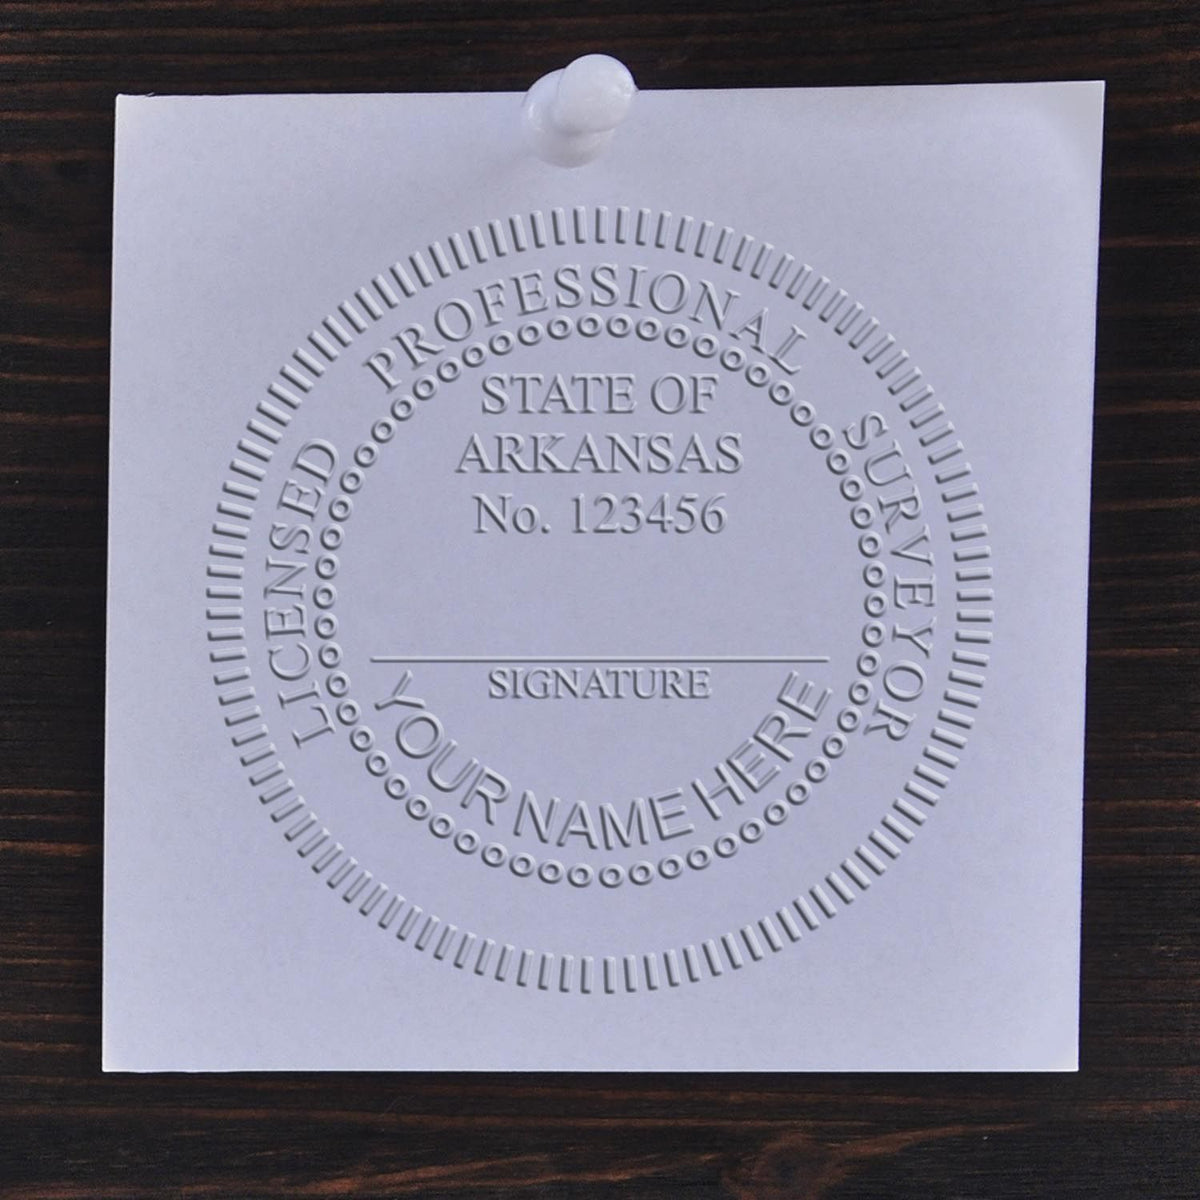 The Gift Arkansas Land Surveyor Seal stamp impression comes to life with a crisp, detailed image stamped on paper - showcasing true professional quality.